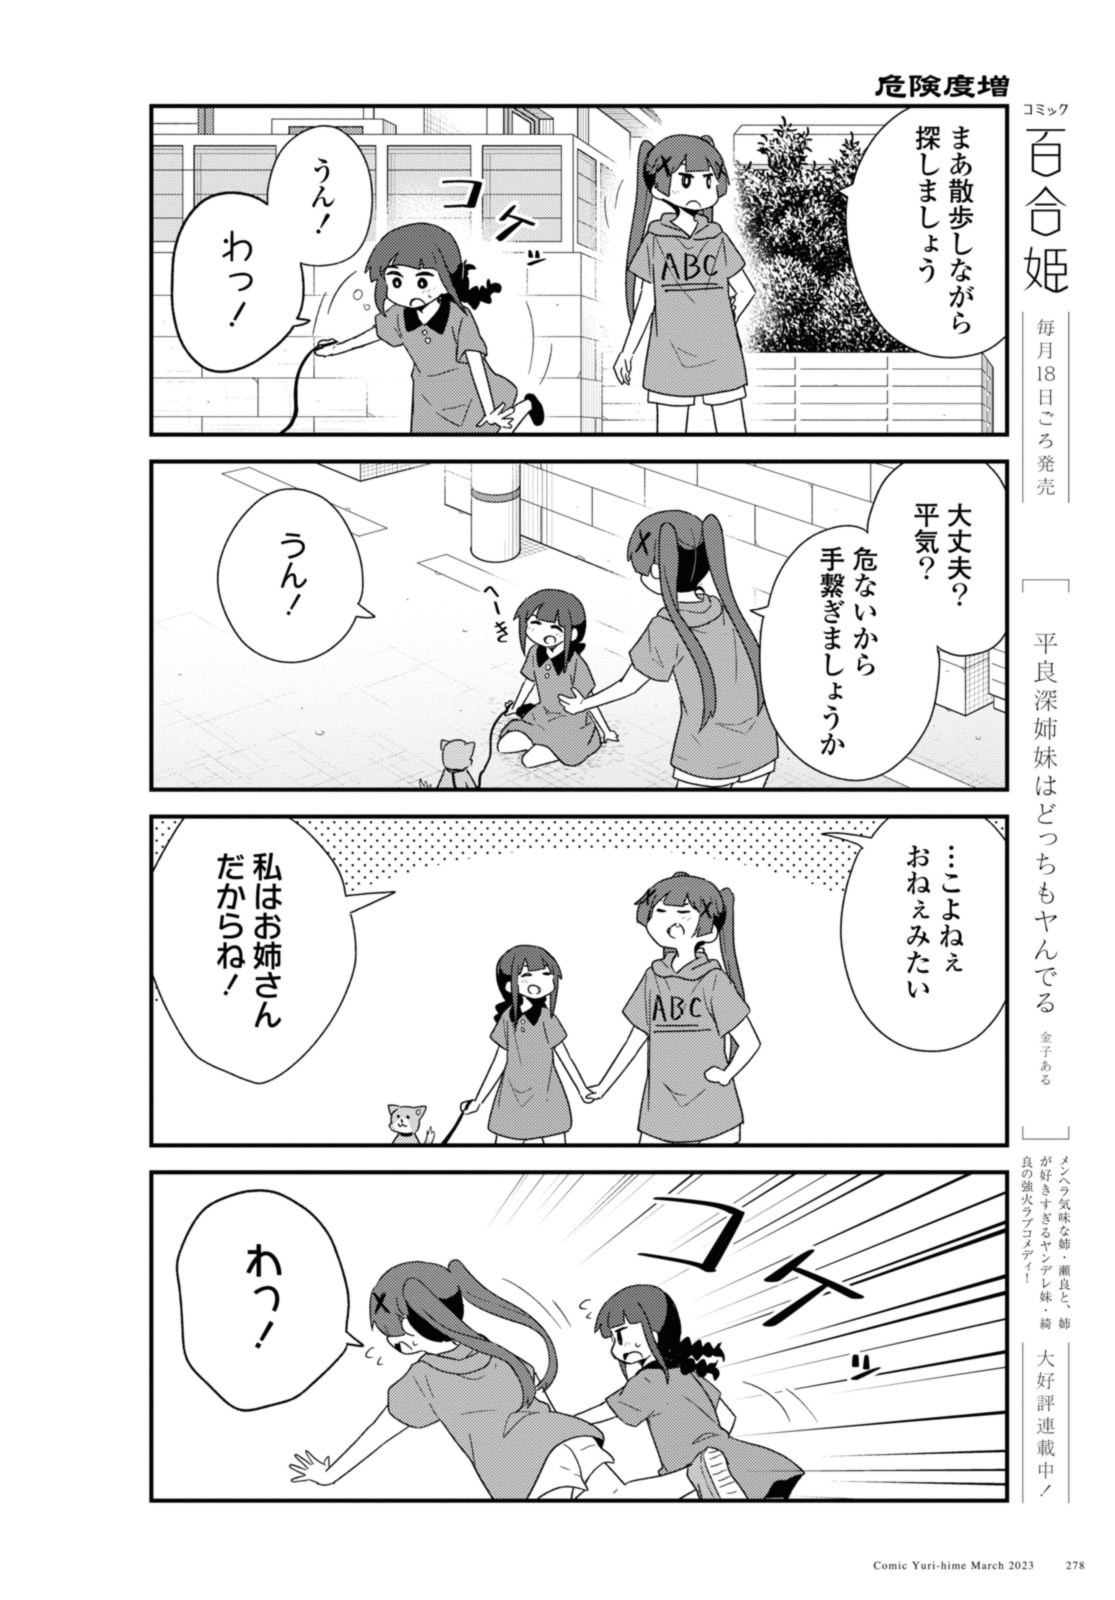 Wataten! An Angel Flew Down to Me 私に天使が舞い降りた！ 第103話 - Page 7